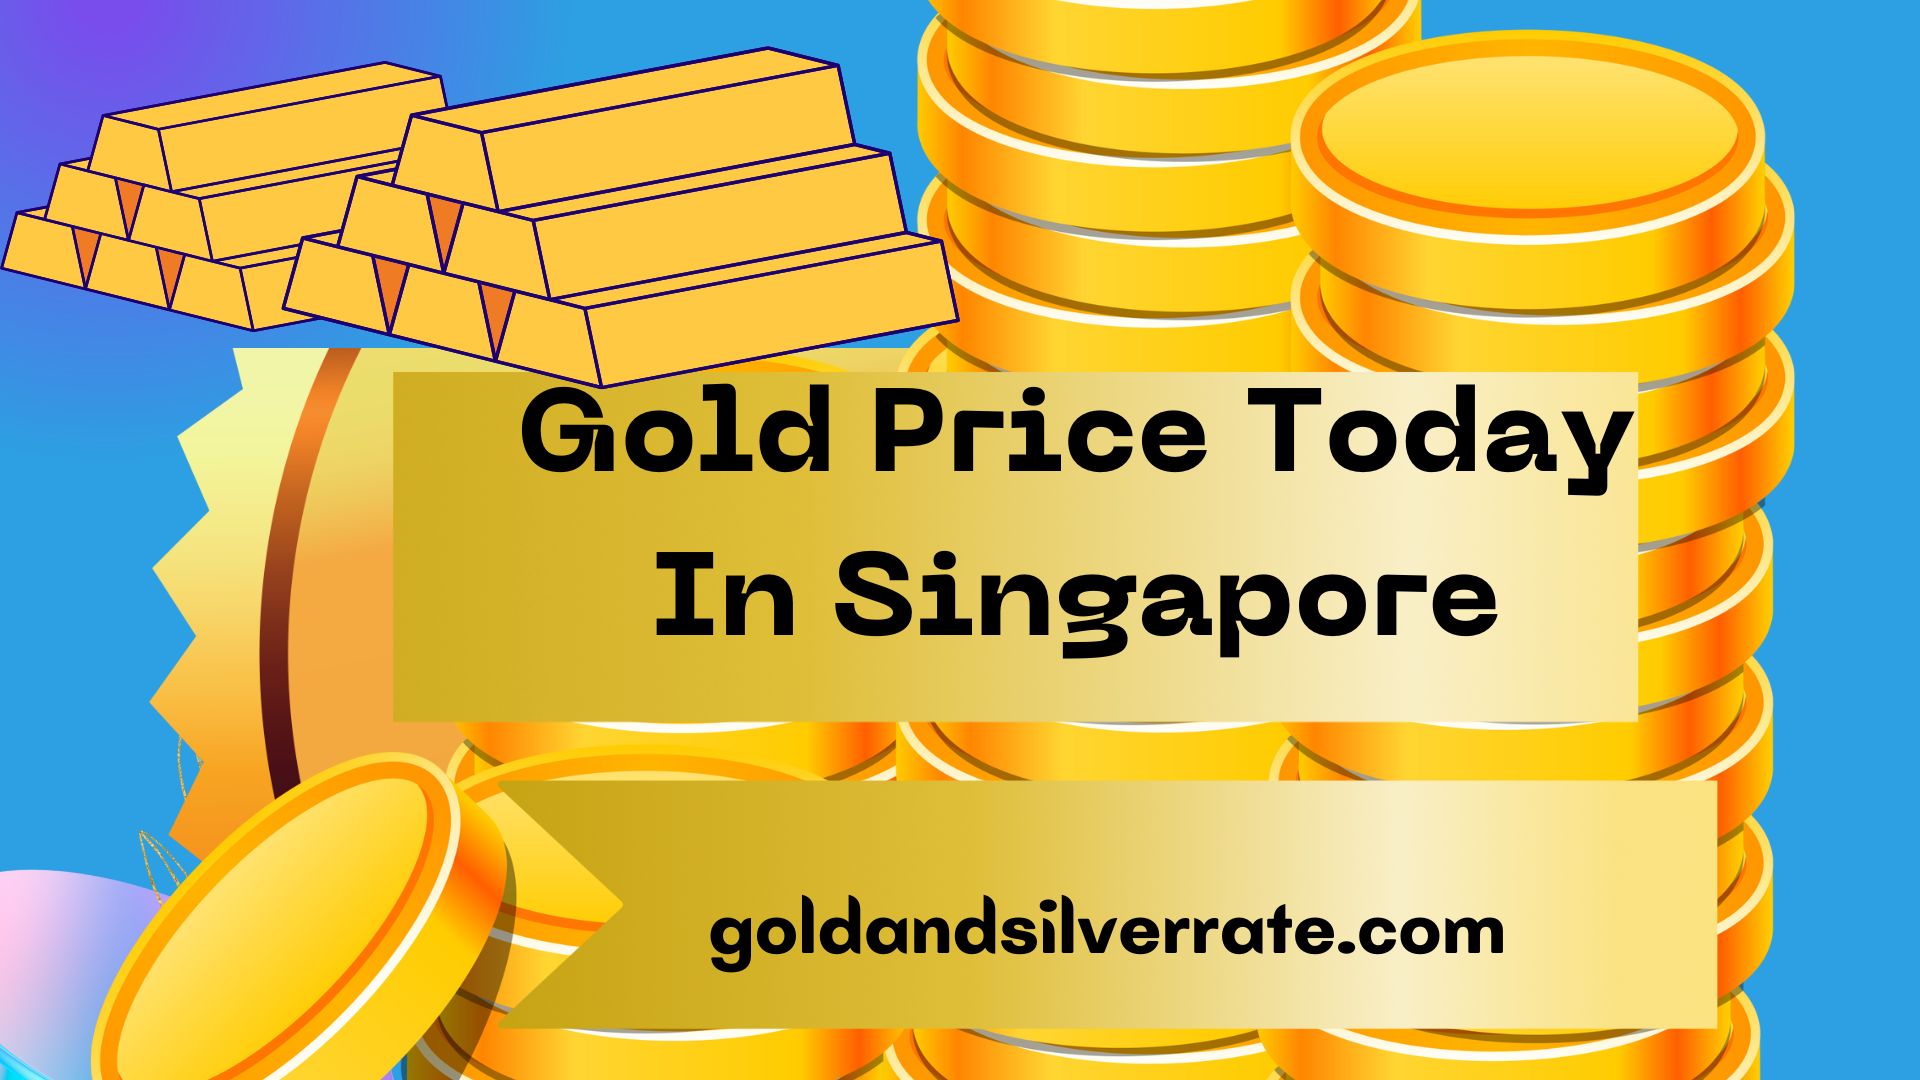 Gold Price Today In Singapore